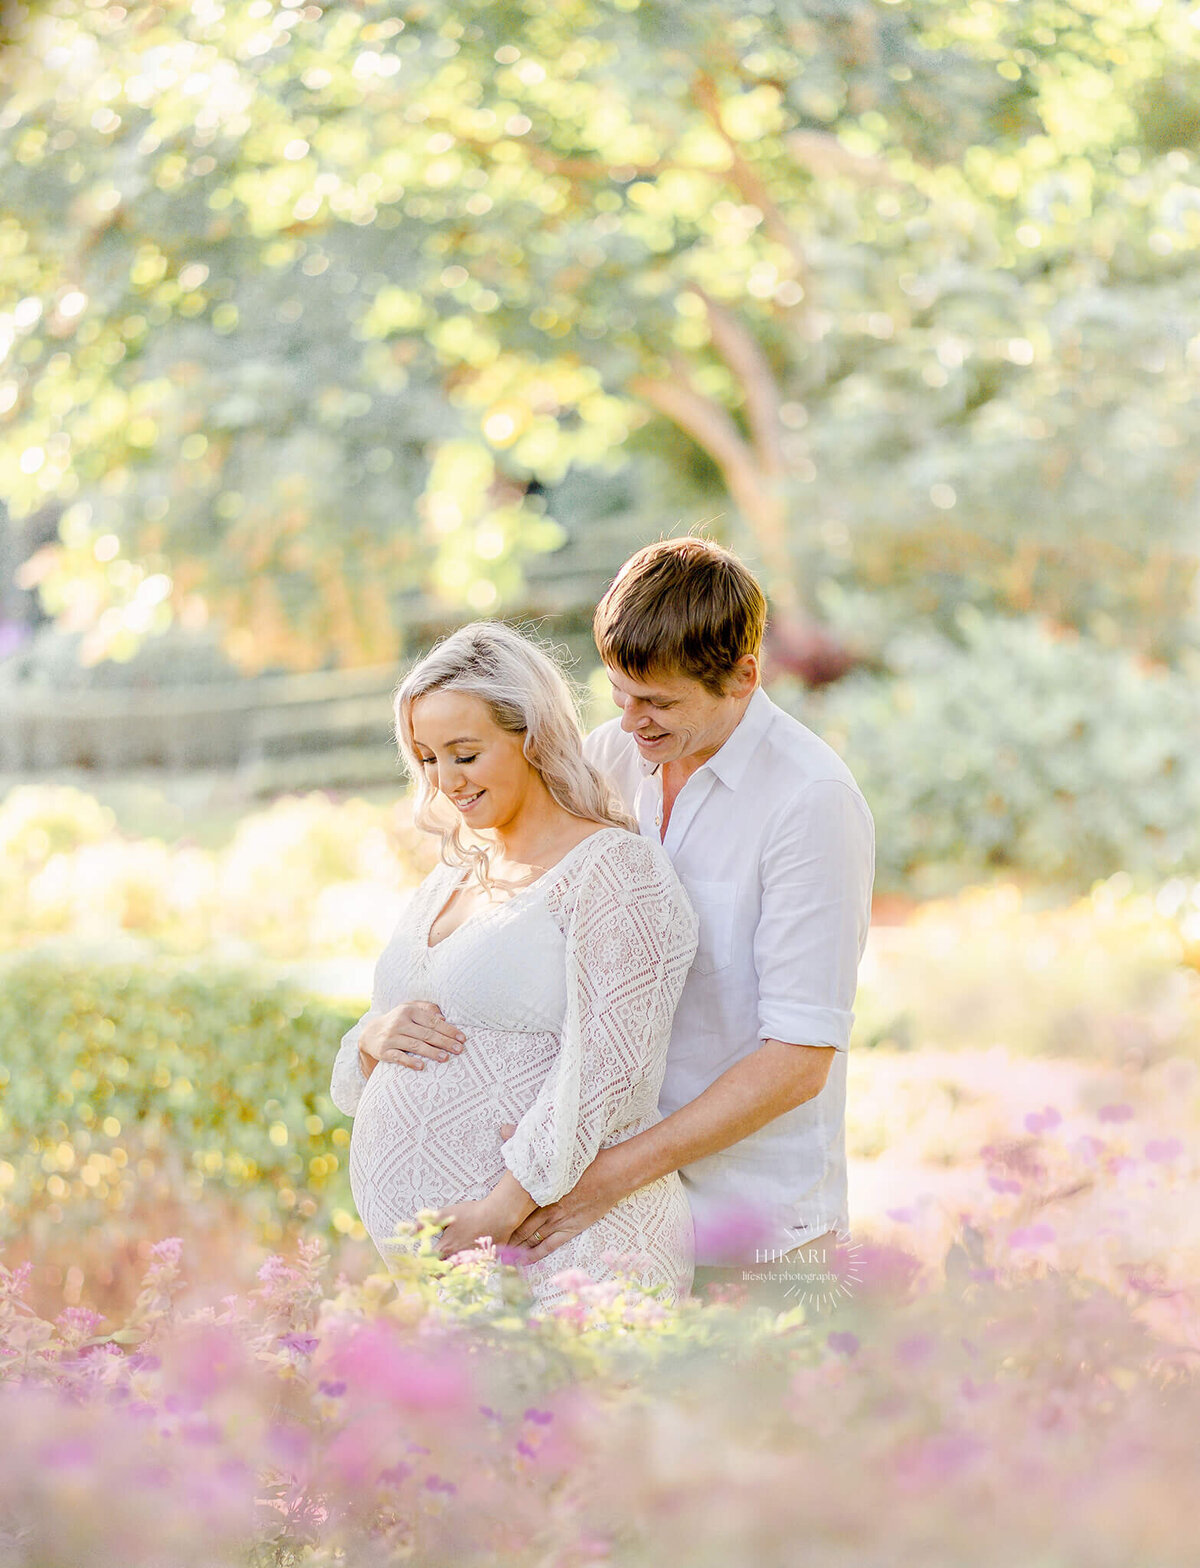 a candid shot of couple laughing during maternity photo session in roma street parklands flowers in brisbane near gold coast